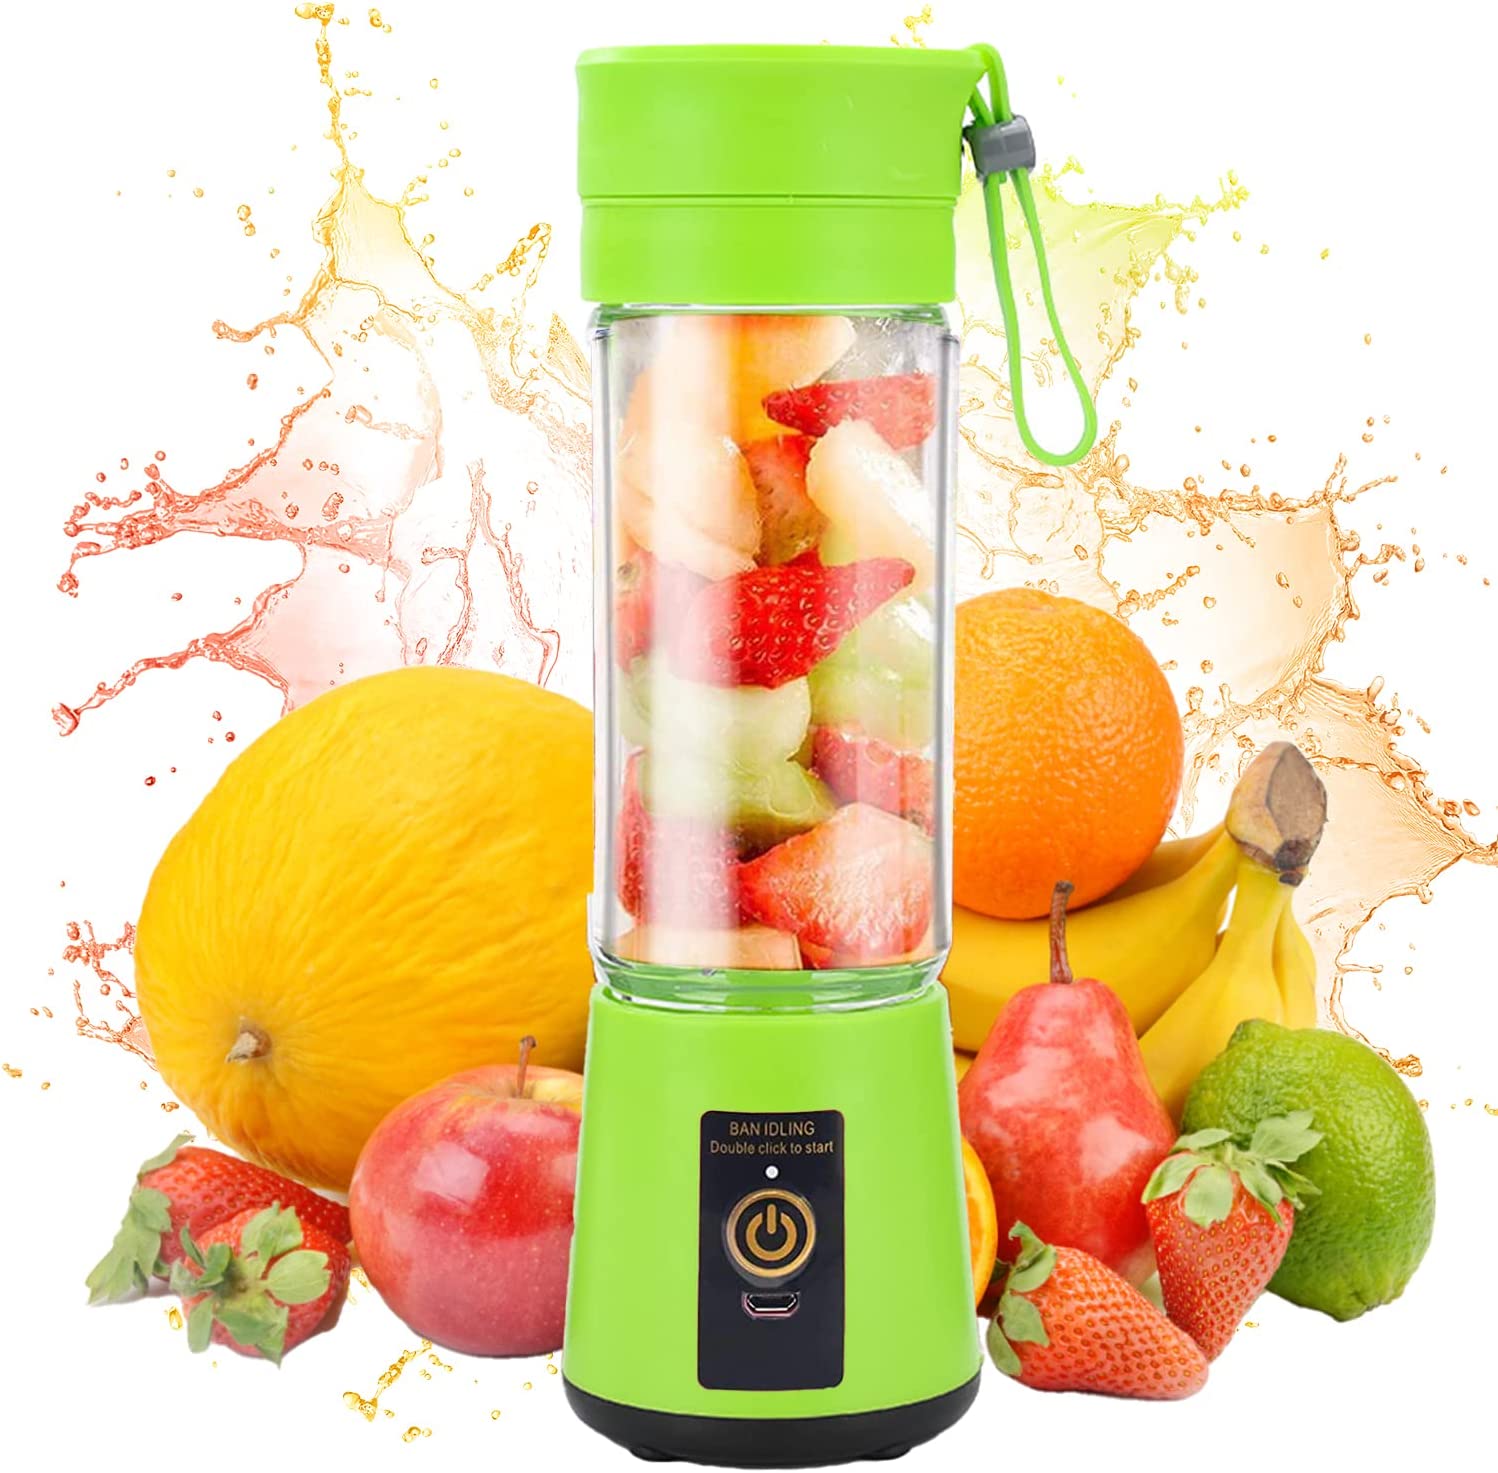 Portable Blender - Rechargeable 6-Sheet Blender Cup | Travel Blender for Fresh Juice Shakes and Smoothies | For Home, Sports, Outdoor, Travel (Green)